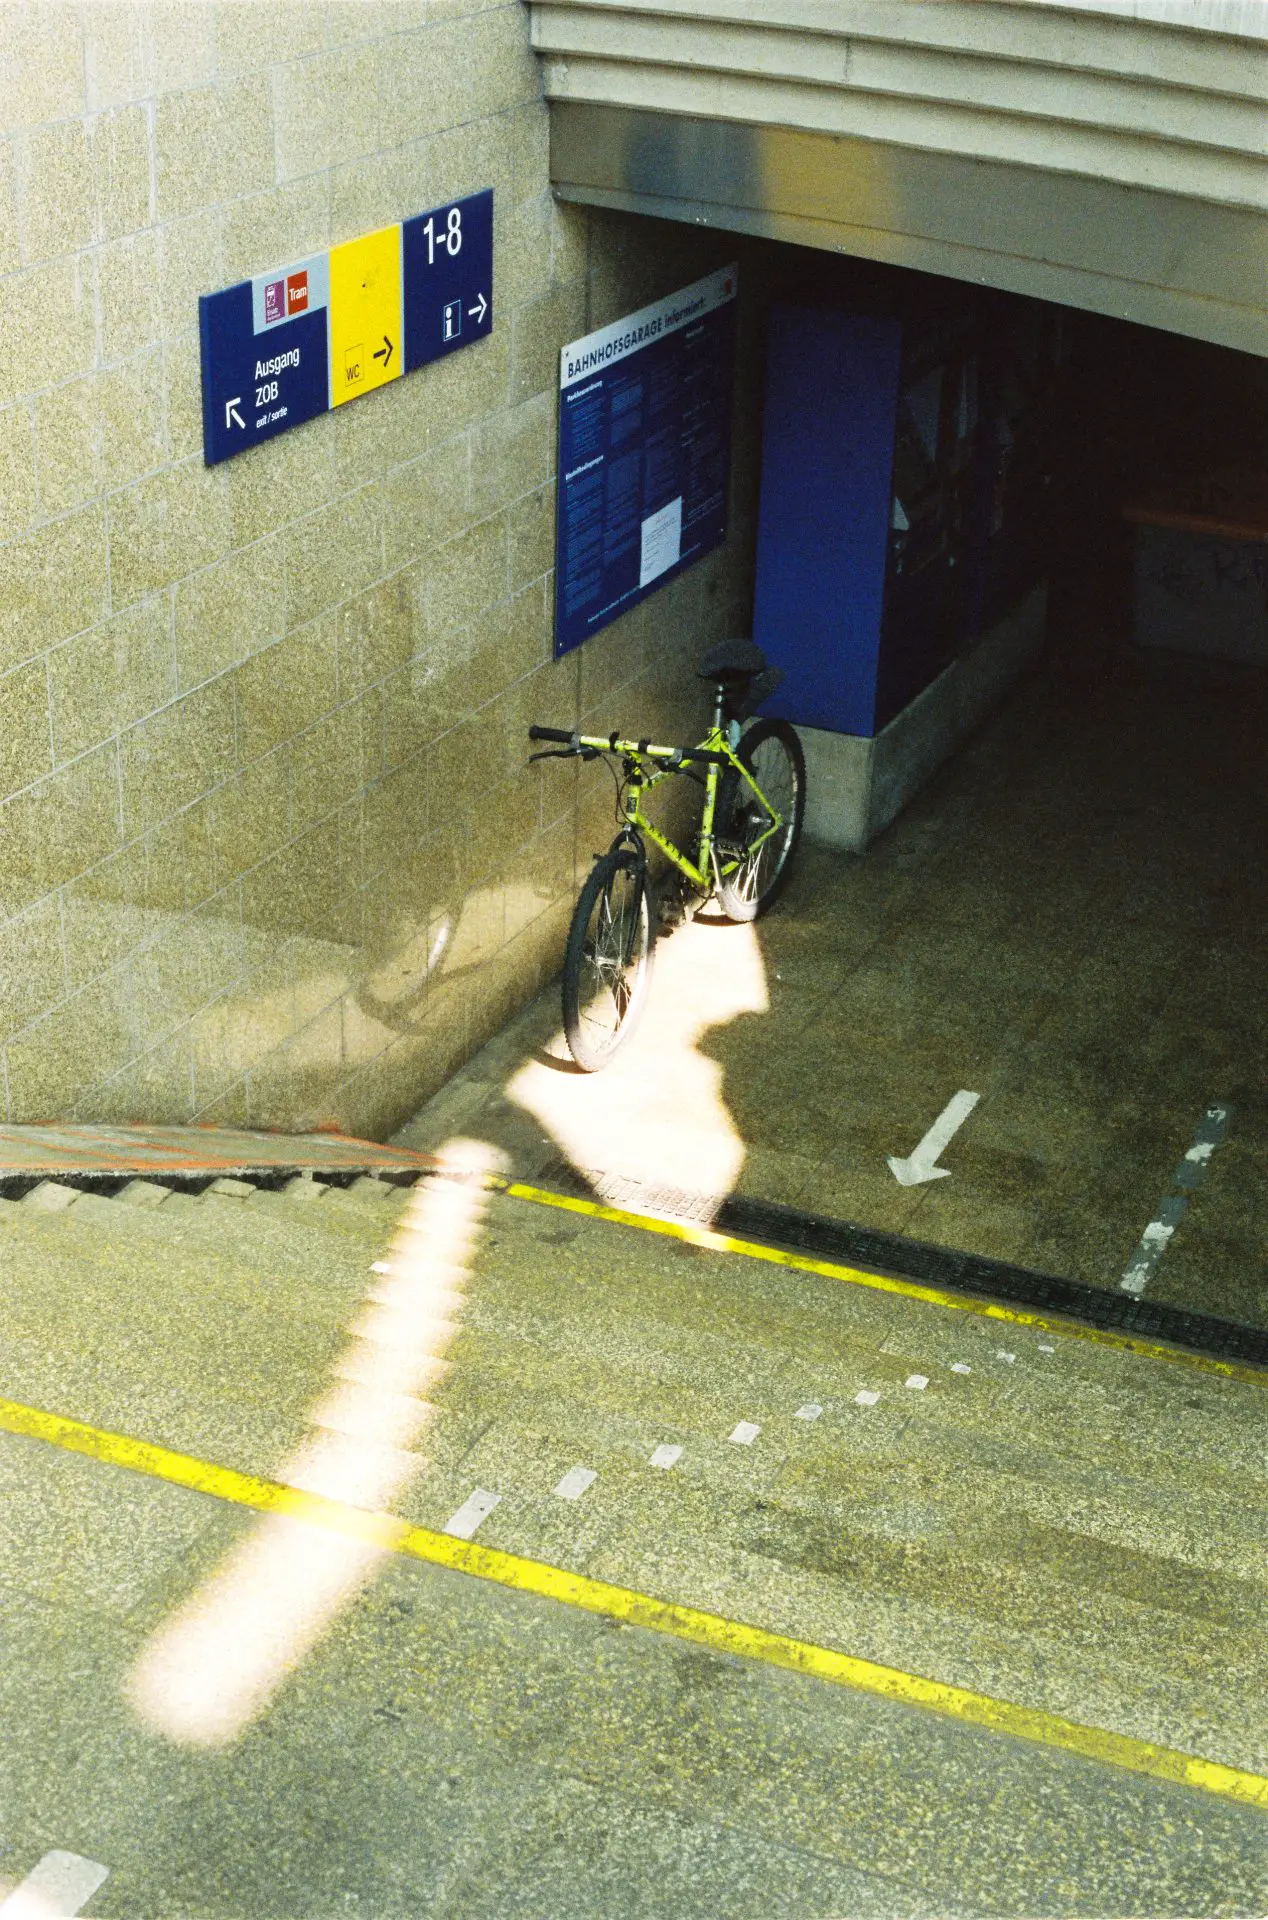 A bicycle stands at the foot of a staircase. The colours blue and yellow are prominent in this photo.